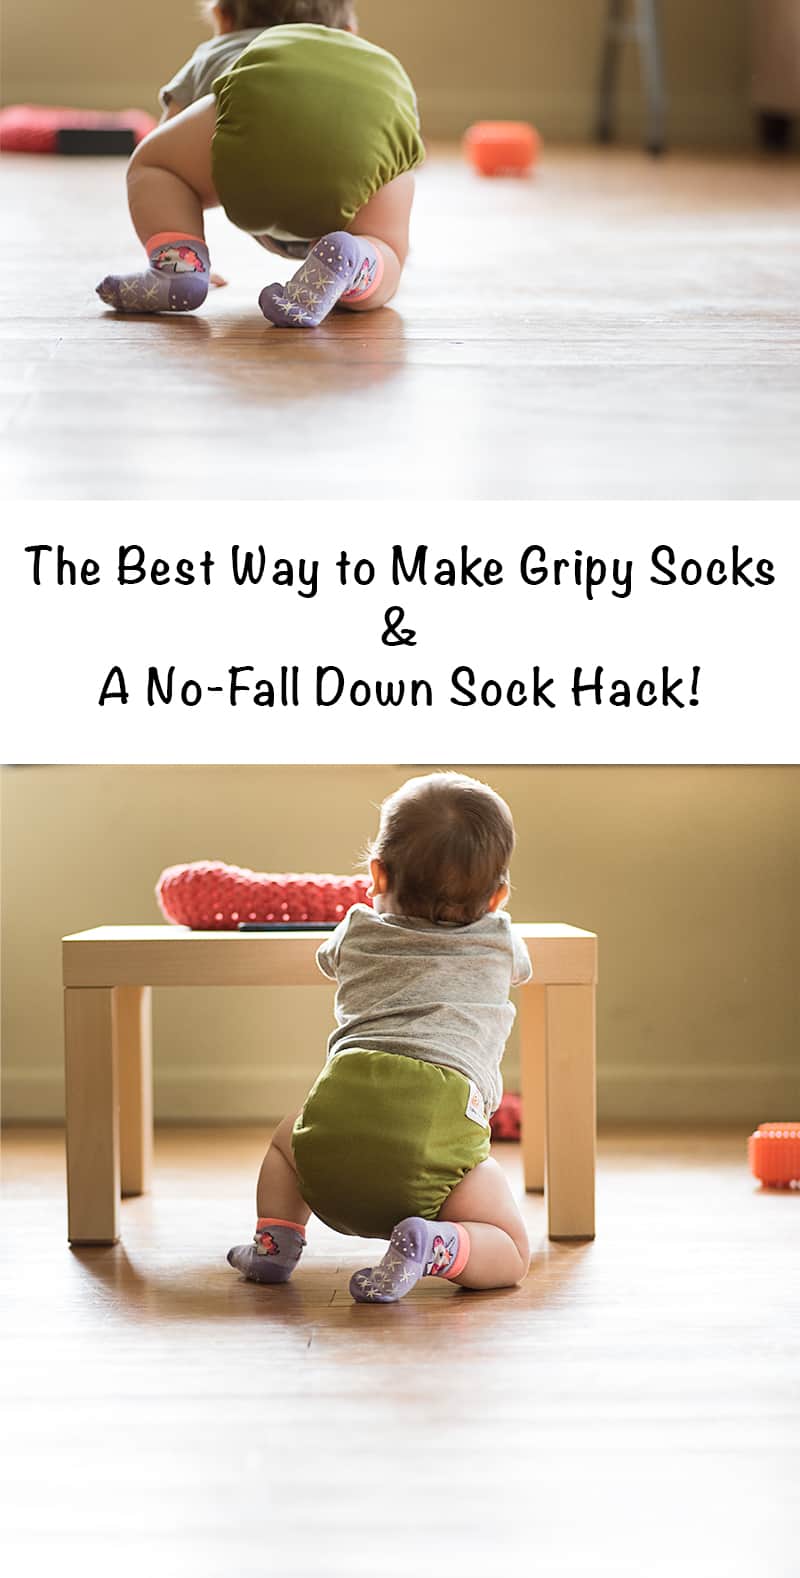 the best way to make grippy socks and a no-fall down sock hack!